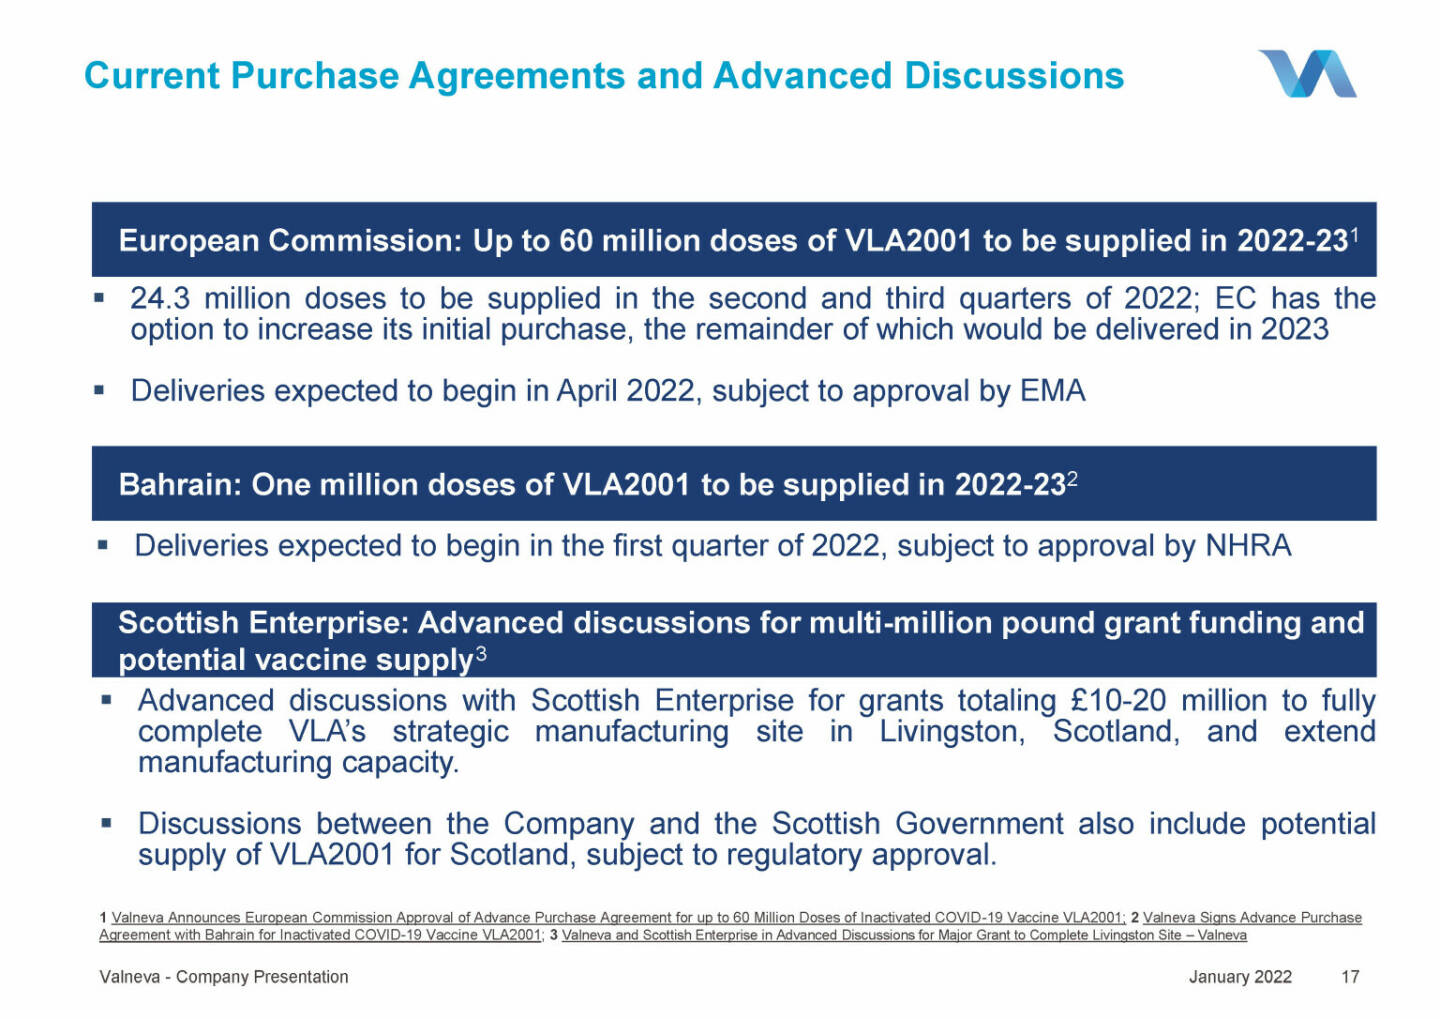 Valneva - Current Purchase Agreements and Advanced Discussions